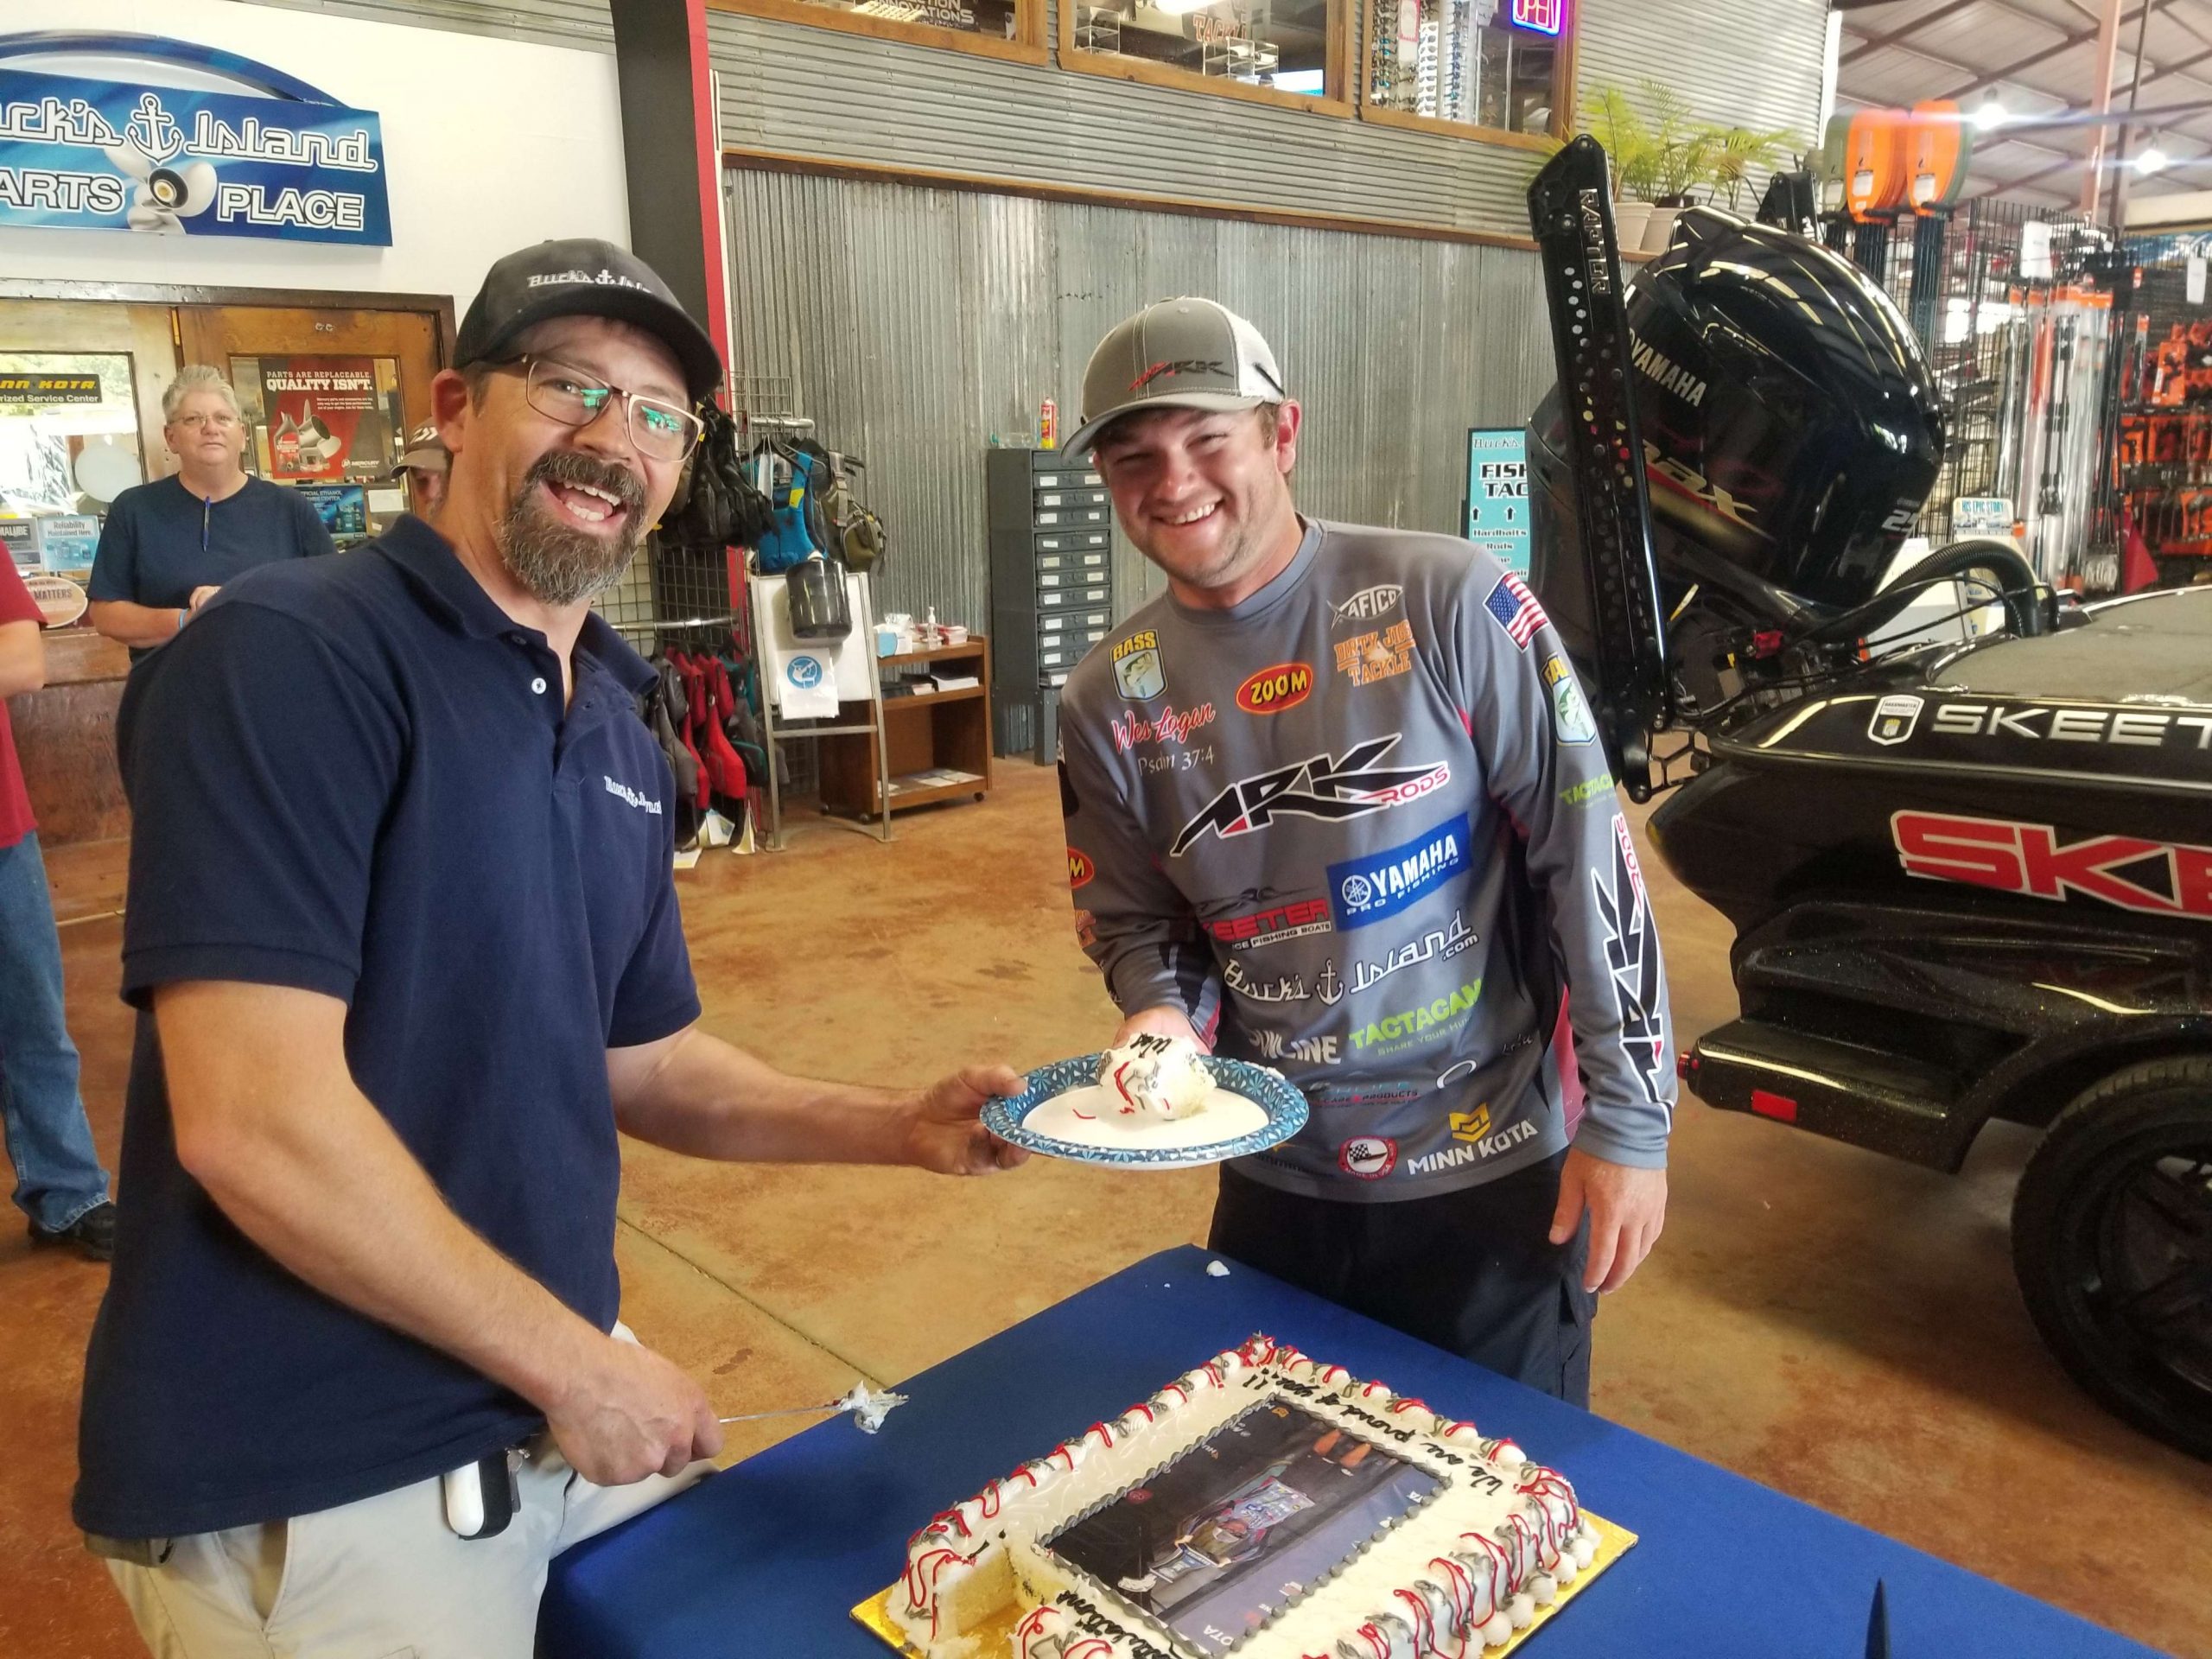 Staff, family, friends and fans came in, chatted, took pictures, got autographs and ate cake complete with a trophy shot from the Elite Series stage at Coosa Landing.  Even B.A.S.S. Chairman Chase Anderson made an appearance to congratulate the newest Elite Champion. 